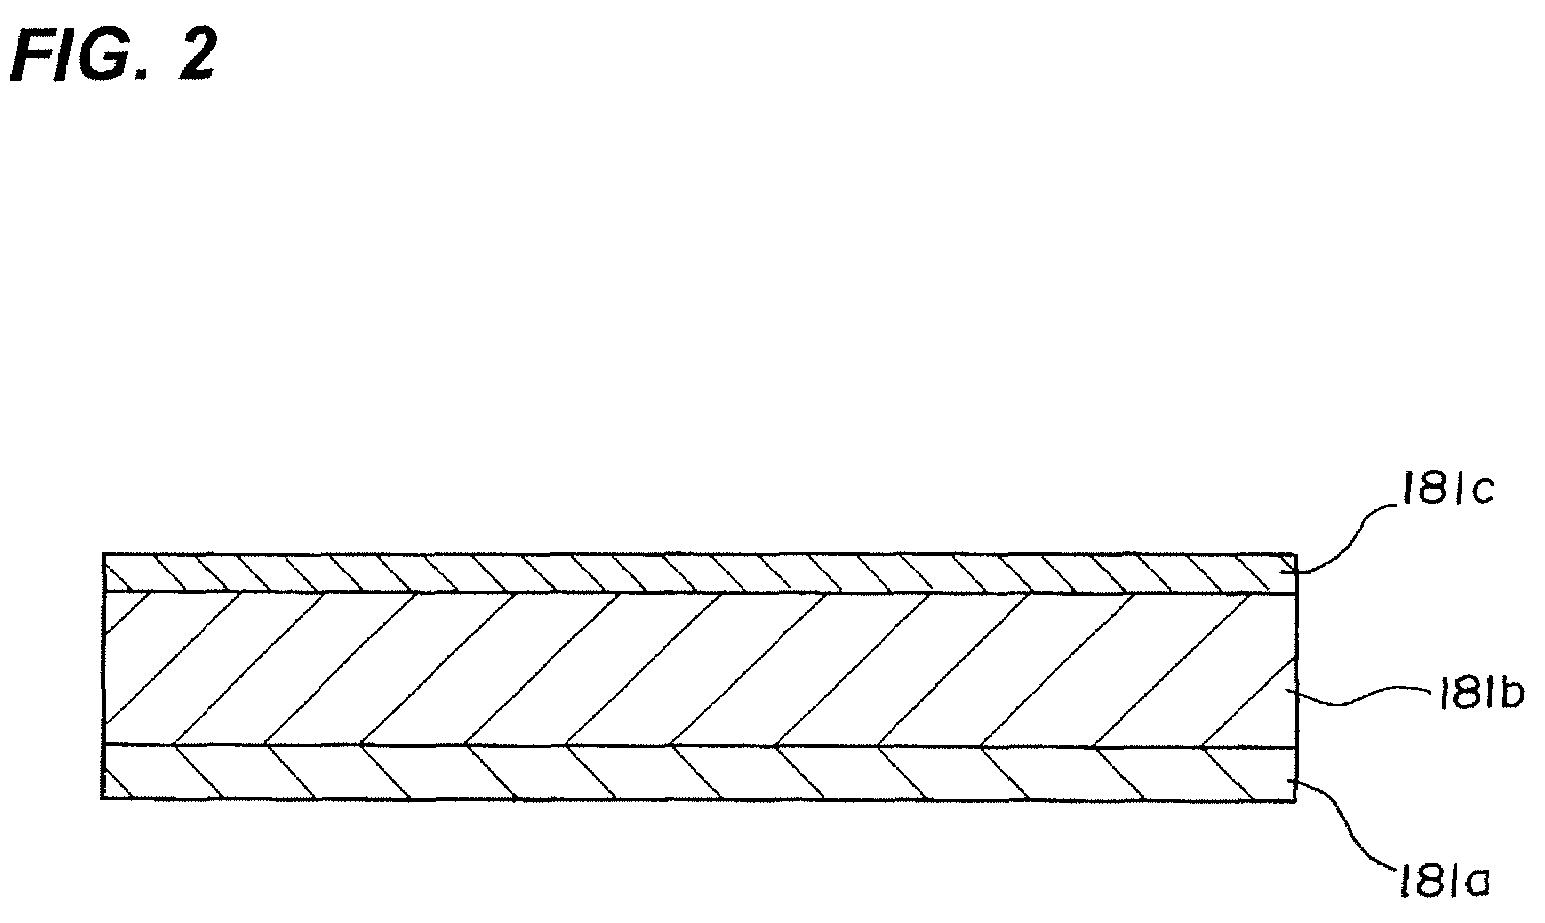 Image forming apparatus including a cleaning web for removing residual toner